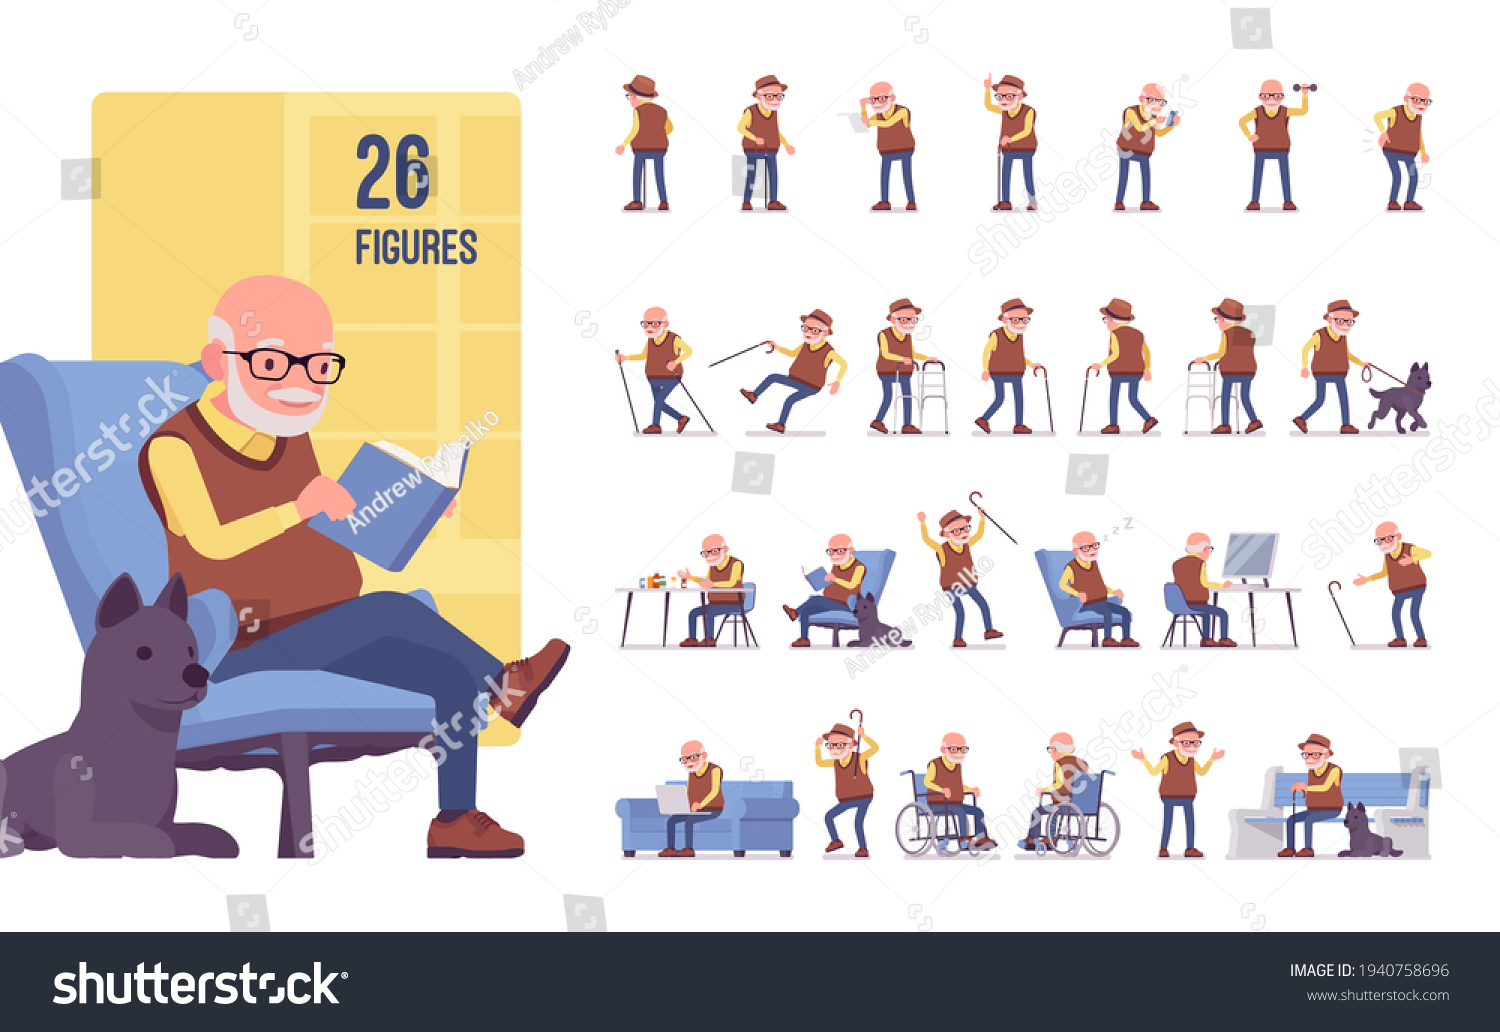 Old man character set, pose sequences. Senior citizen, retired grandfather wearing glasses, old age pensioner, lonely grandpa. Full length, different views, gestures, emotions, positions #1940758696